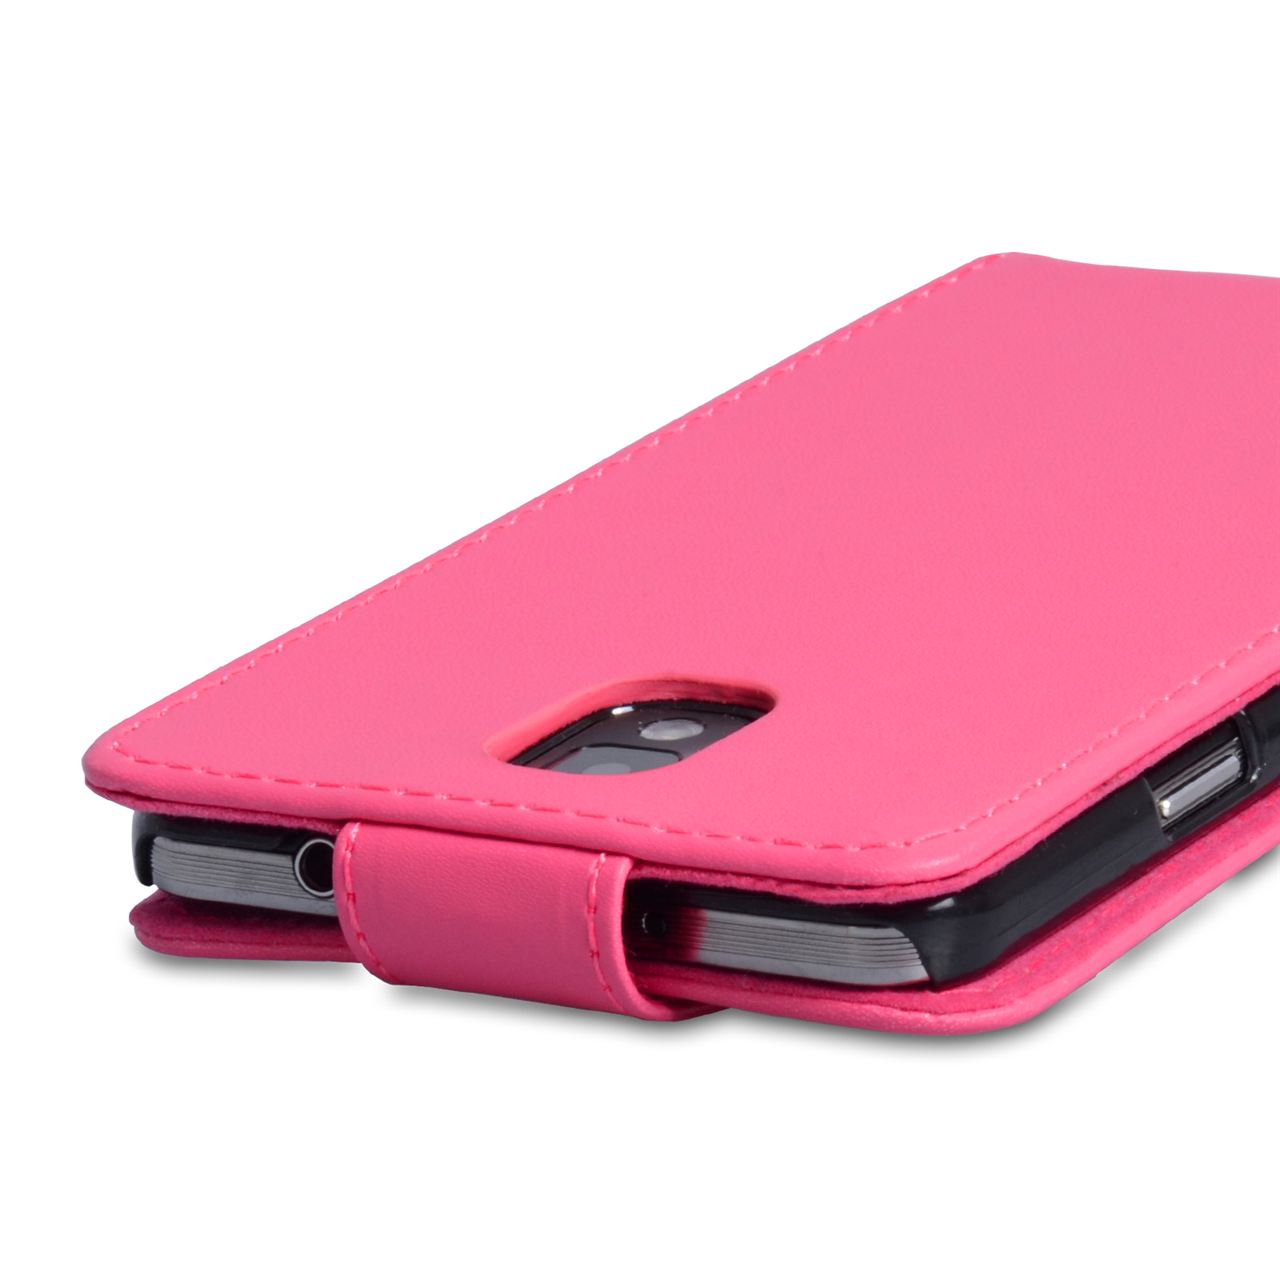 YouSave Samsung Galaxy Note 3 Leather Effect Flip Case - Hot Pink